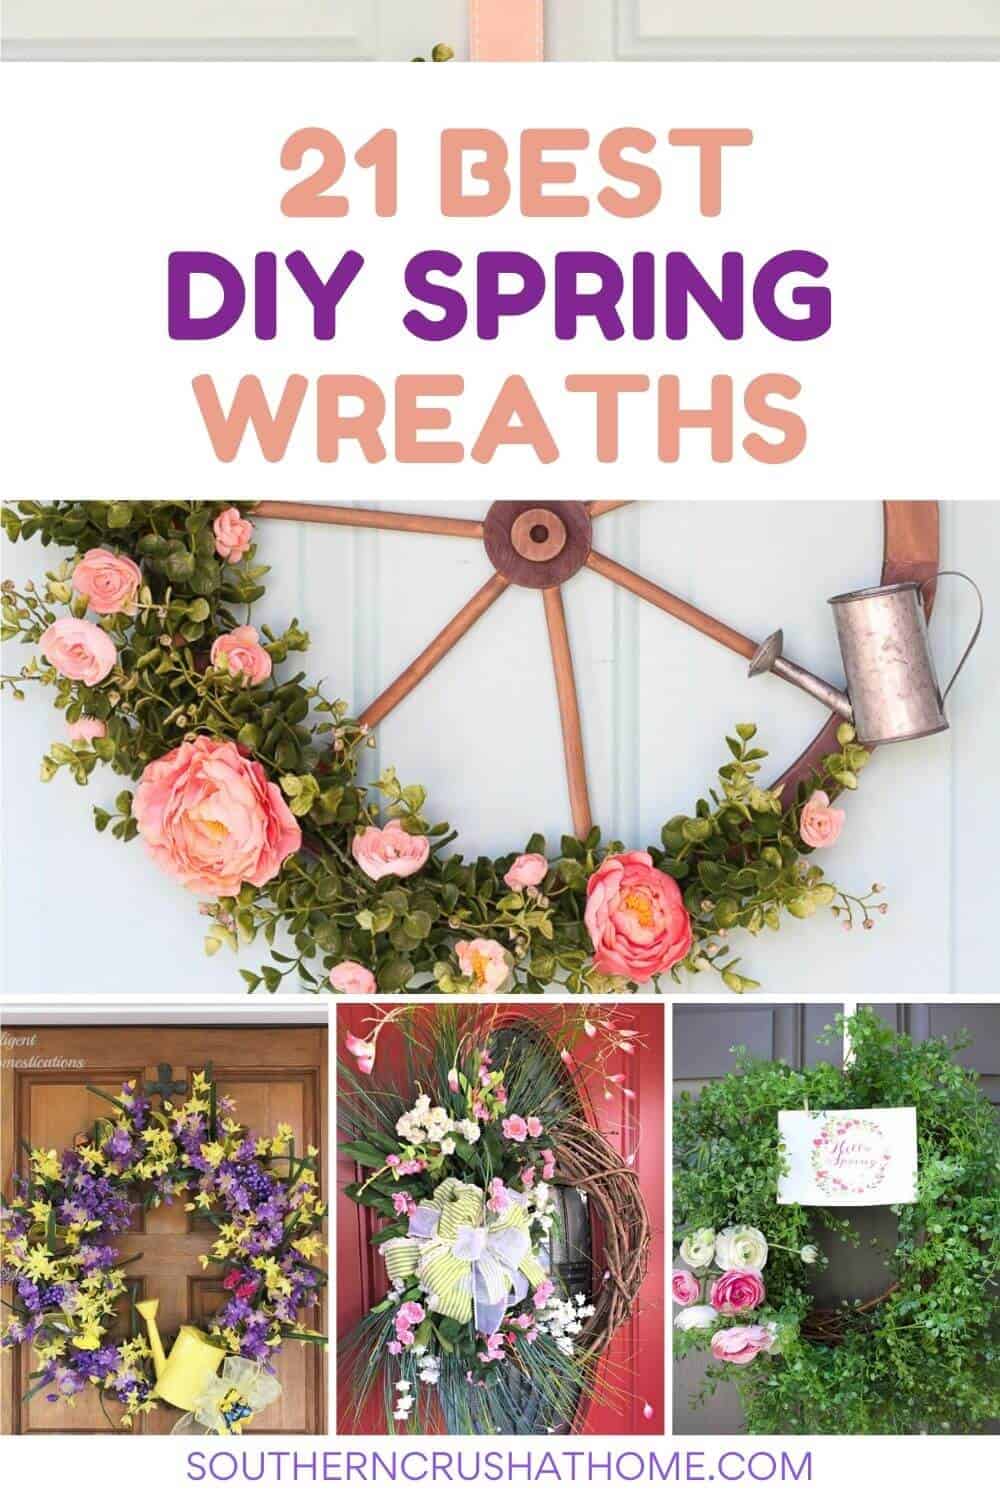 32 DIY Spring Wreaths - How to Make a Spring Wreath Yourself